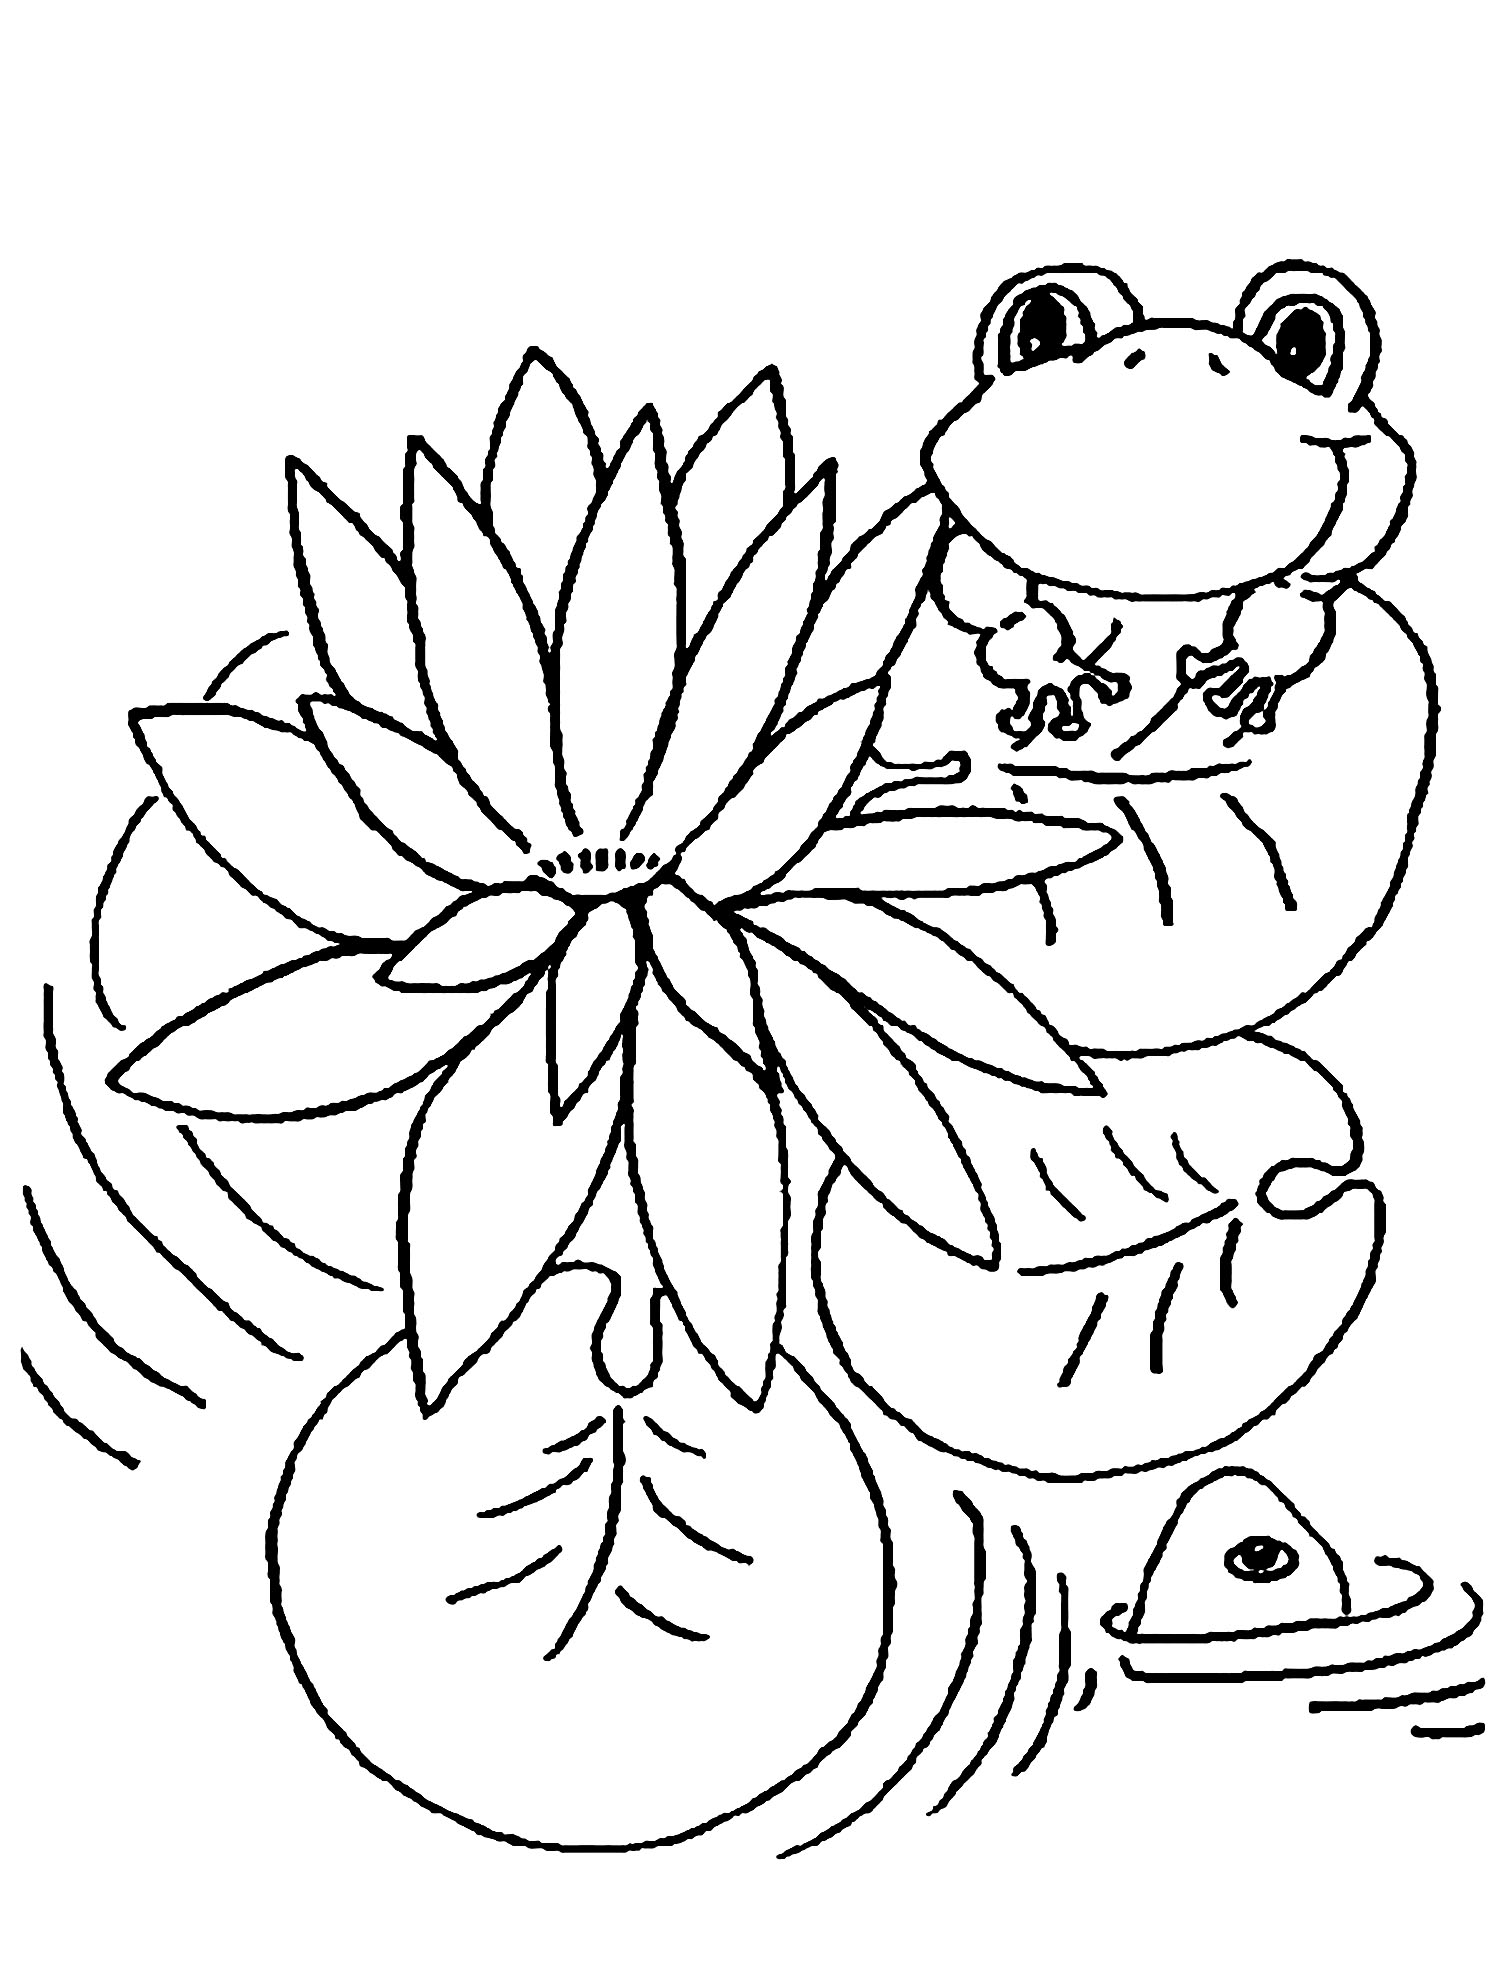 frogs-kids-coloring-pages